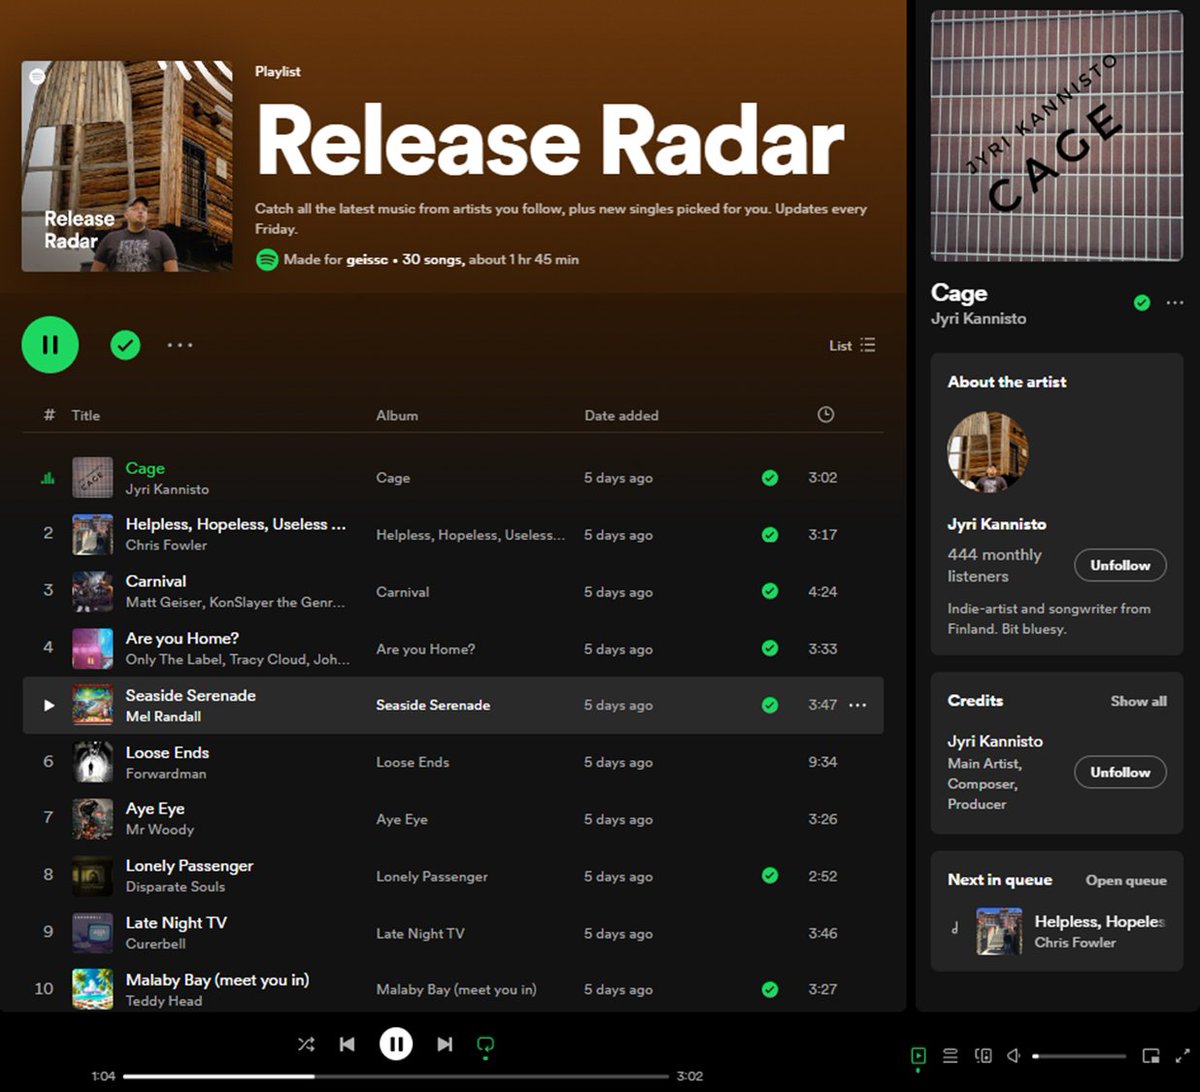 My #Spotify #ReleaseRadar has been really cool listening so far this week... Great #NewMusic release from @JyriKannisto @chrisfowlersong @KonSlayer_GW @onlythehost @MelRandall11 @SoulsDisparate @chelseadan1409 AWESOME #IndieMusic!! ❤️🤘